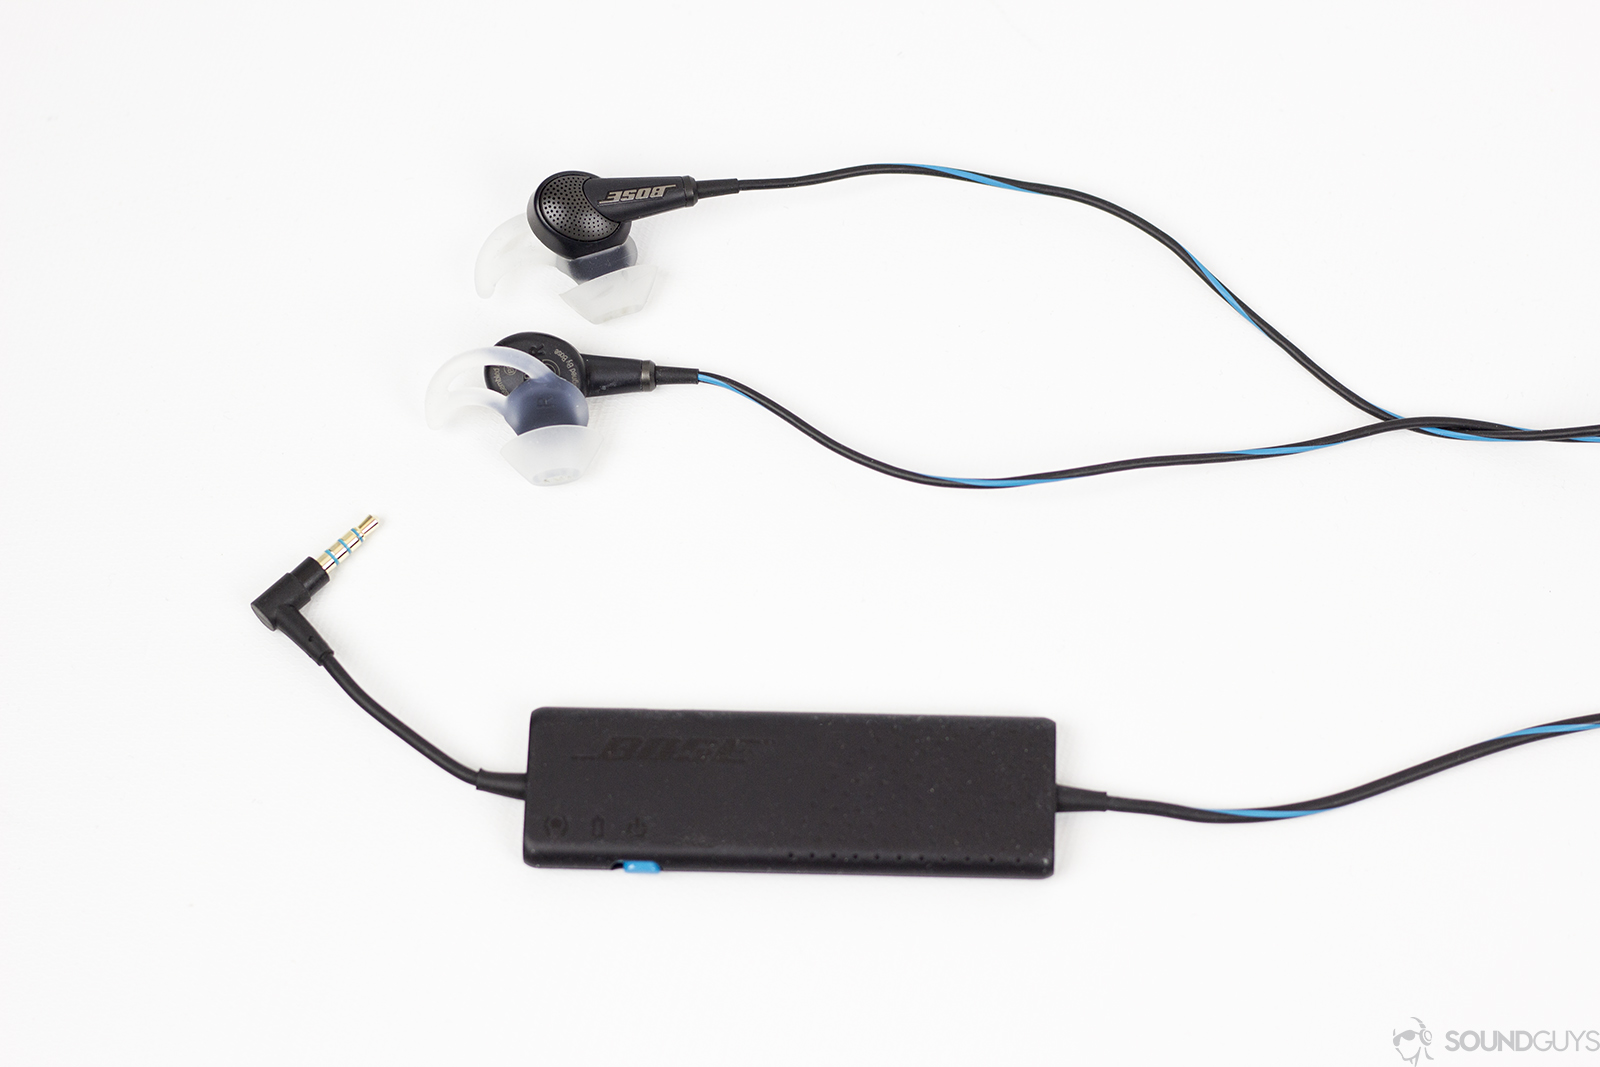 Bose QC 20 noise canceling earbuds and noise canceling controller on white background.